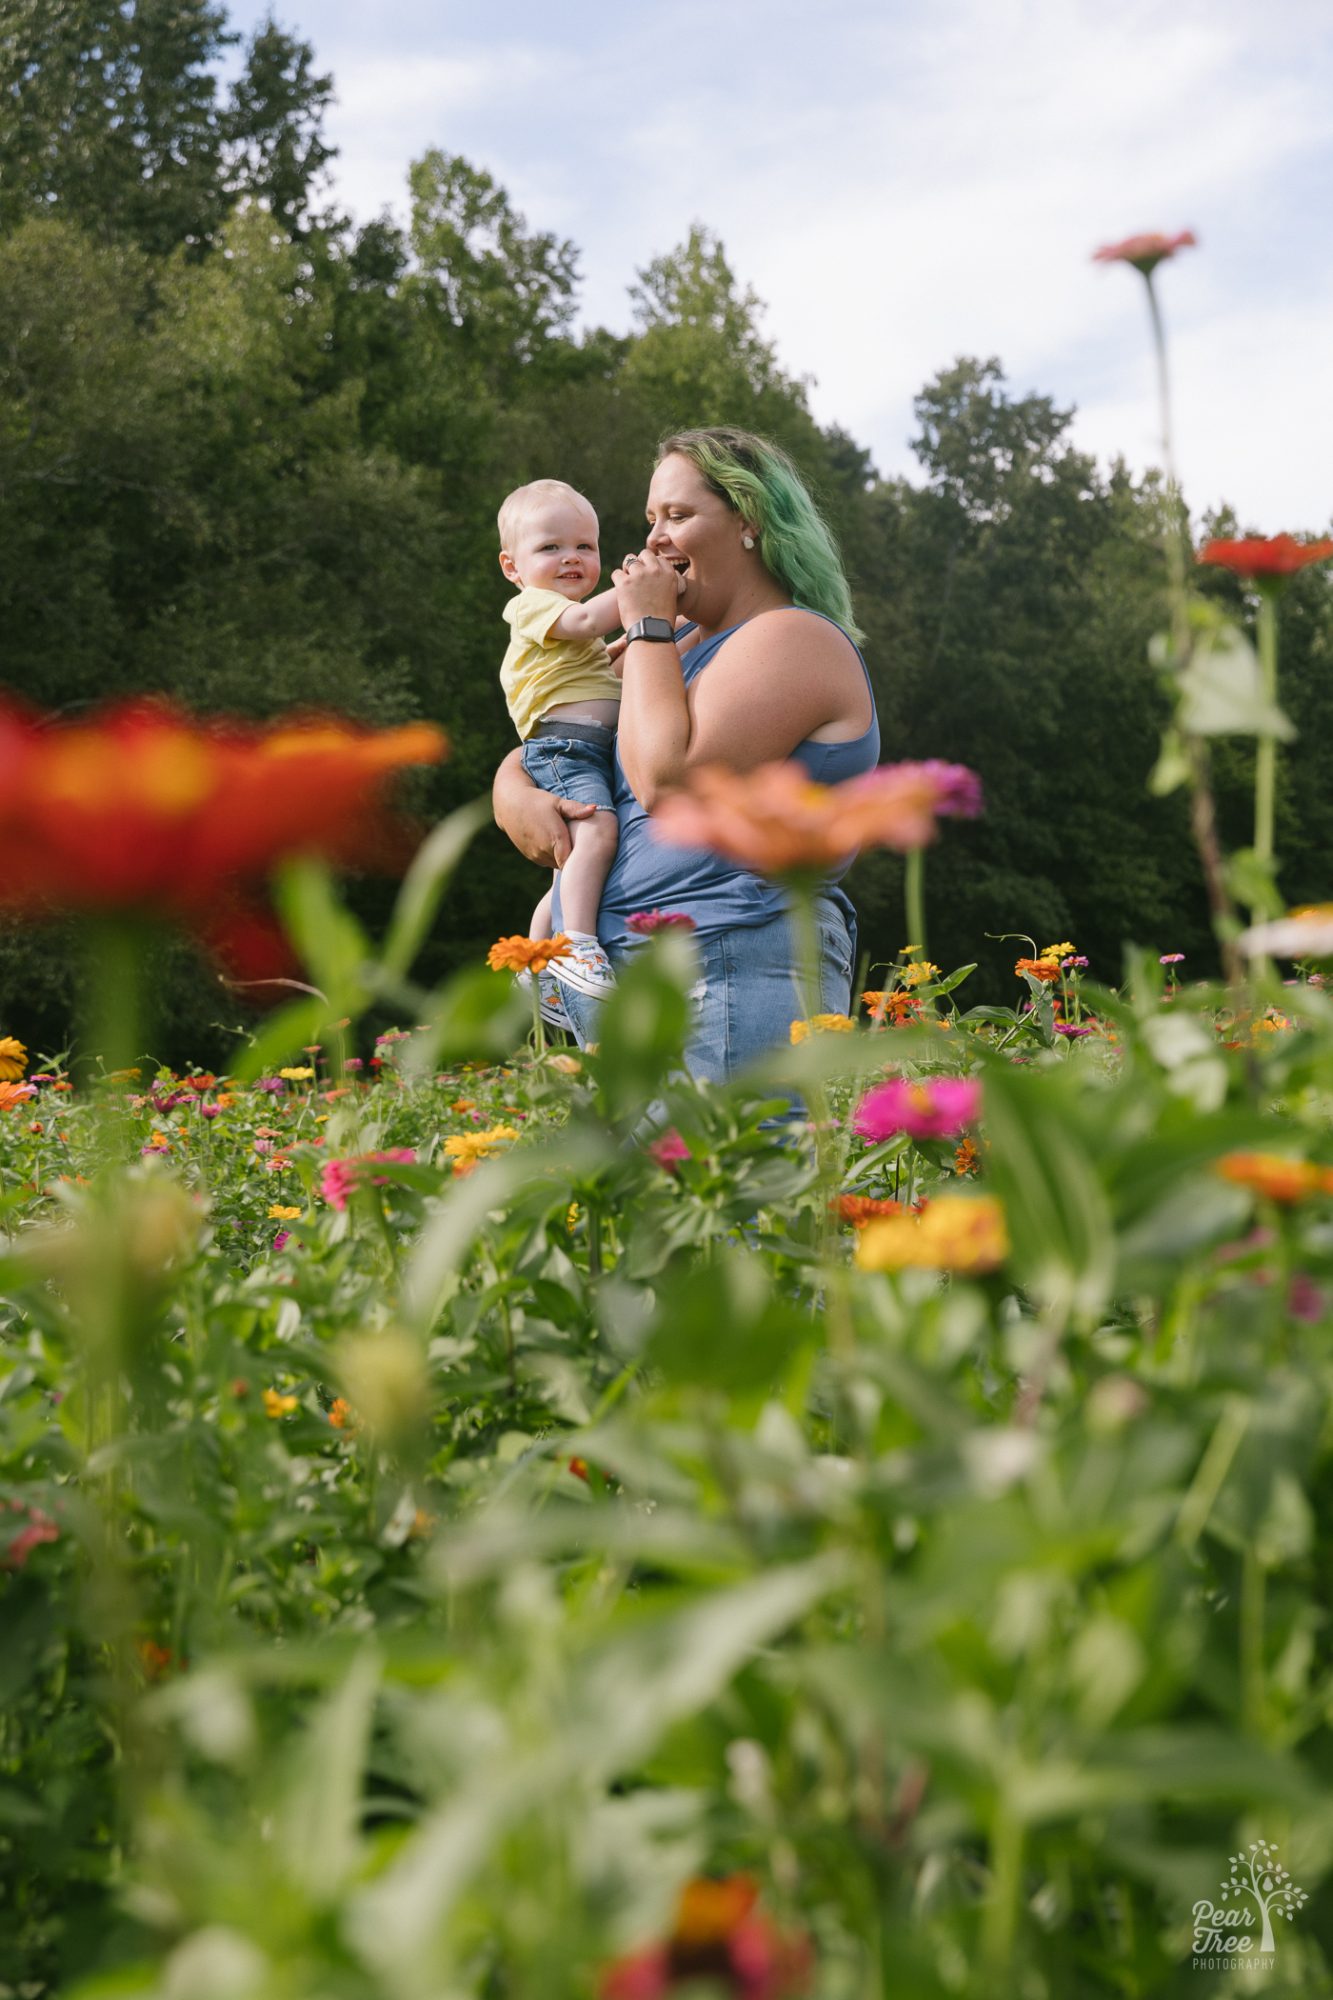 Mom with green hair holding her one year old son in a field of flowers